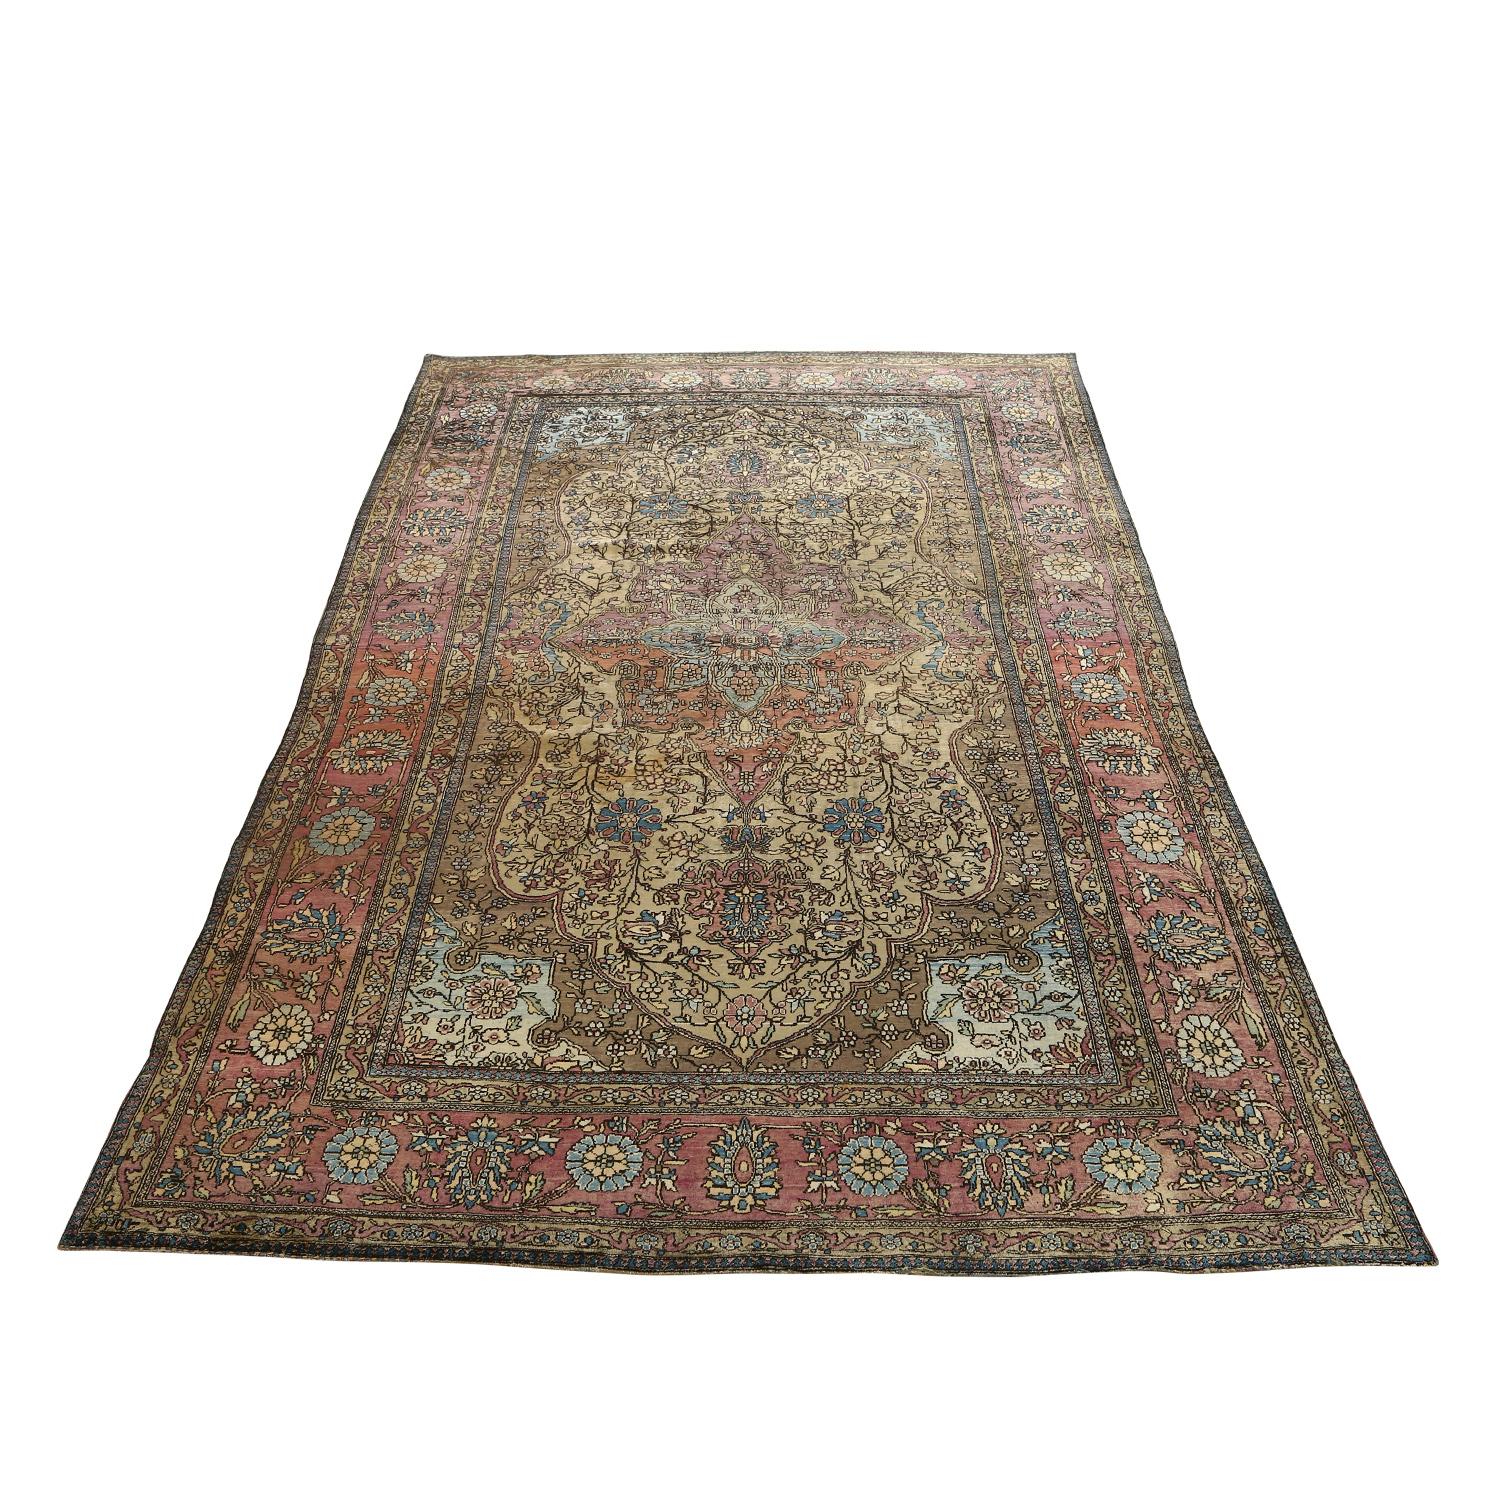 Sarouk Farahan Damoka Collection Pure Silk Persian Antique Farahan - Size: 7 ft 6 in x 4 ft 4in For Sale